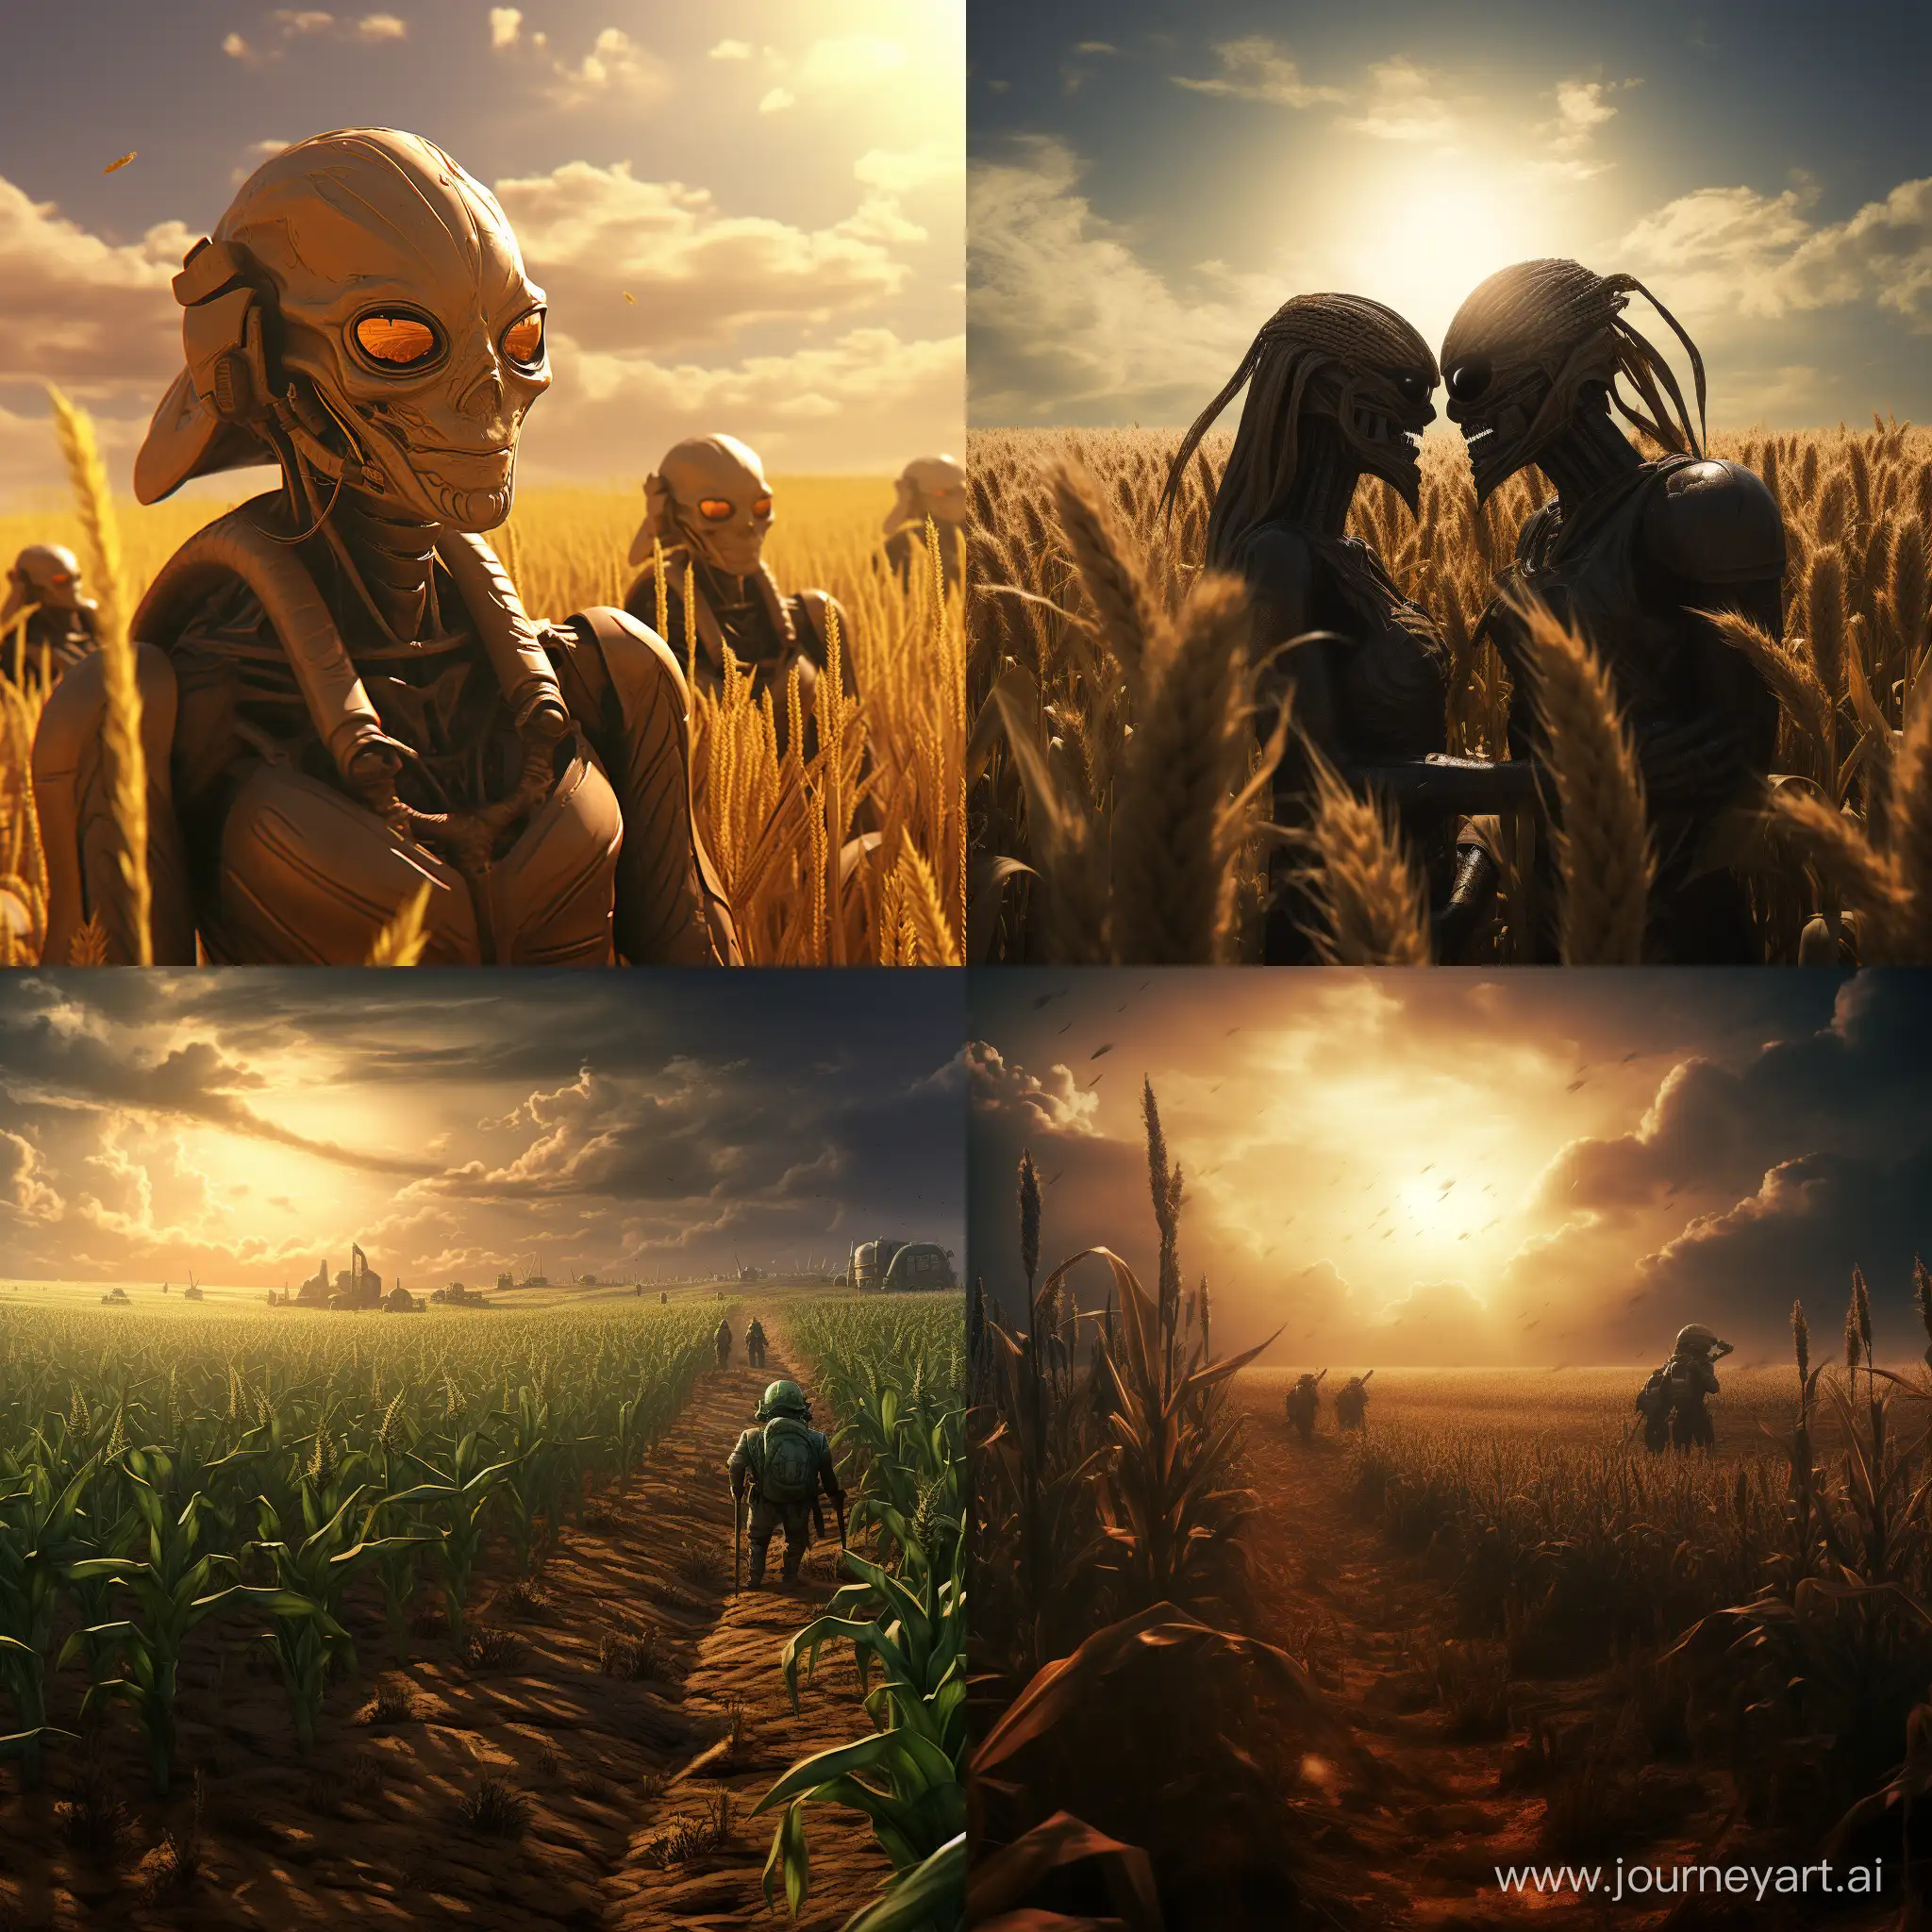 Mysterious-Extraterrestrials-Roaming-Through-Enigmatic-Cornfield